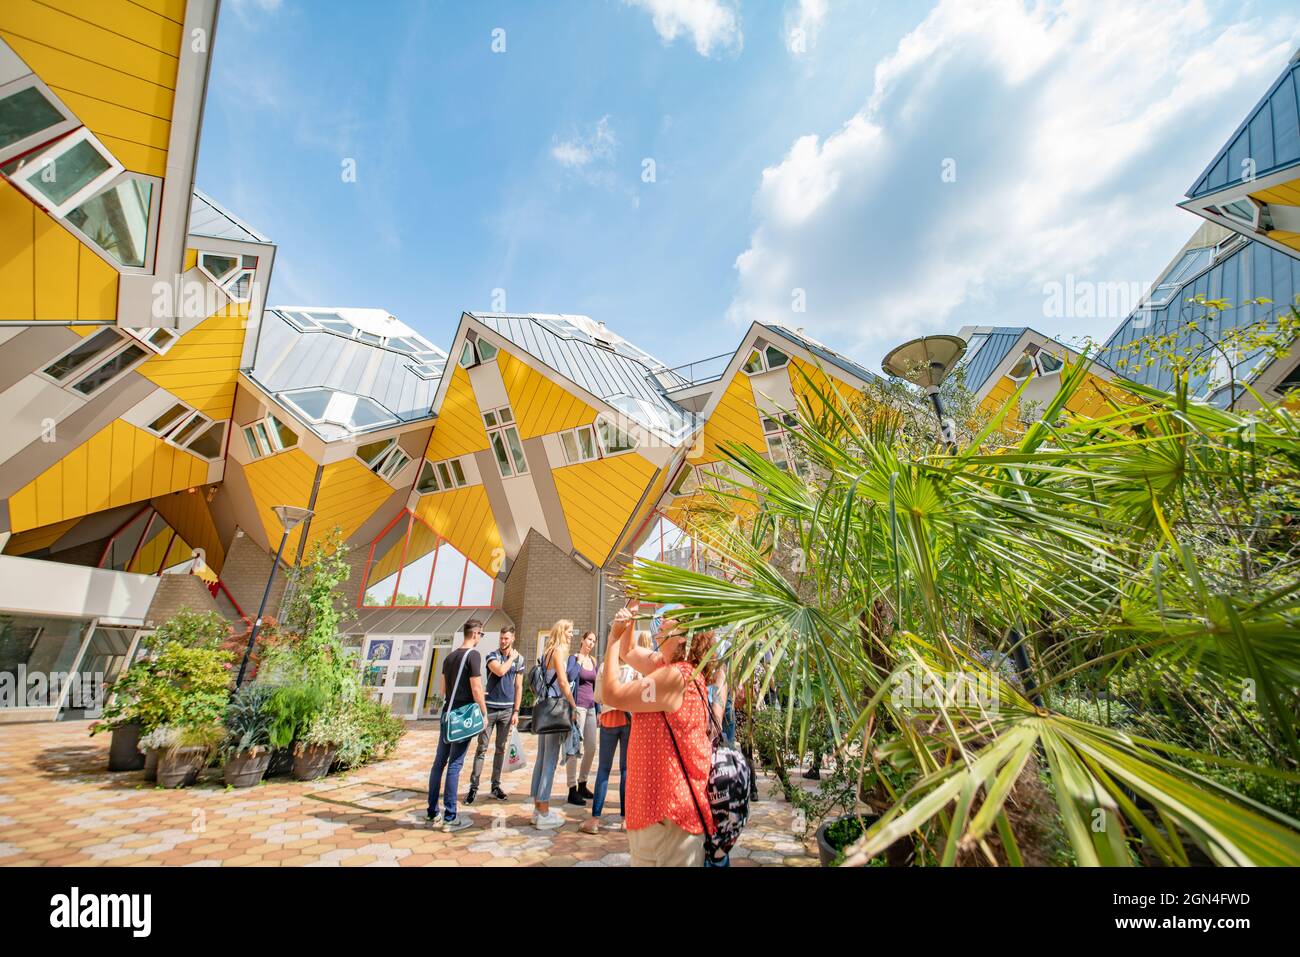 Rotterdam Netherlands - August 22 2021; Yellow exteriors and shapes and propped up look of cubic houses a popular tourist attraction in city. with blu Stock Photo